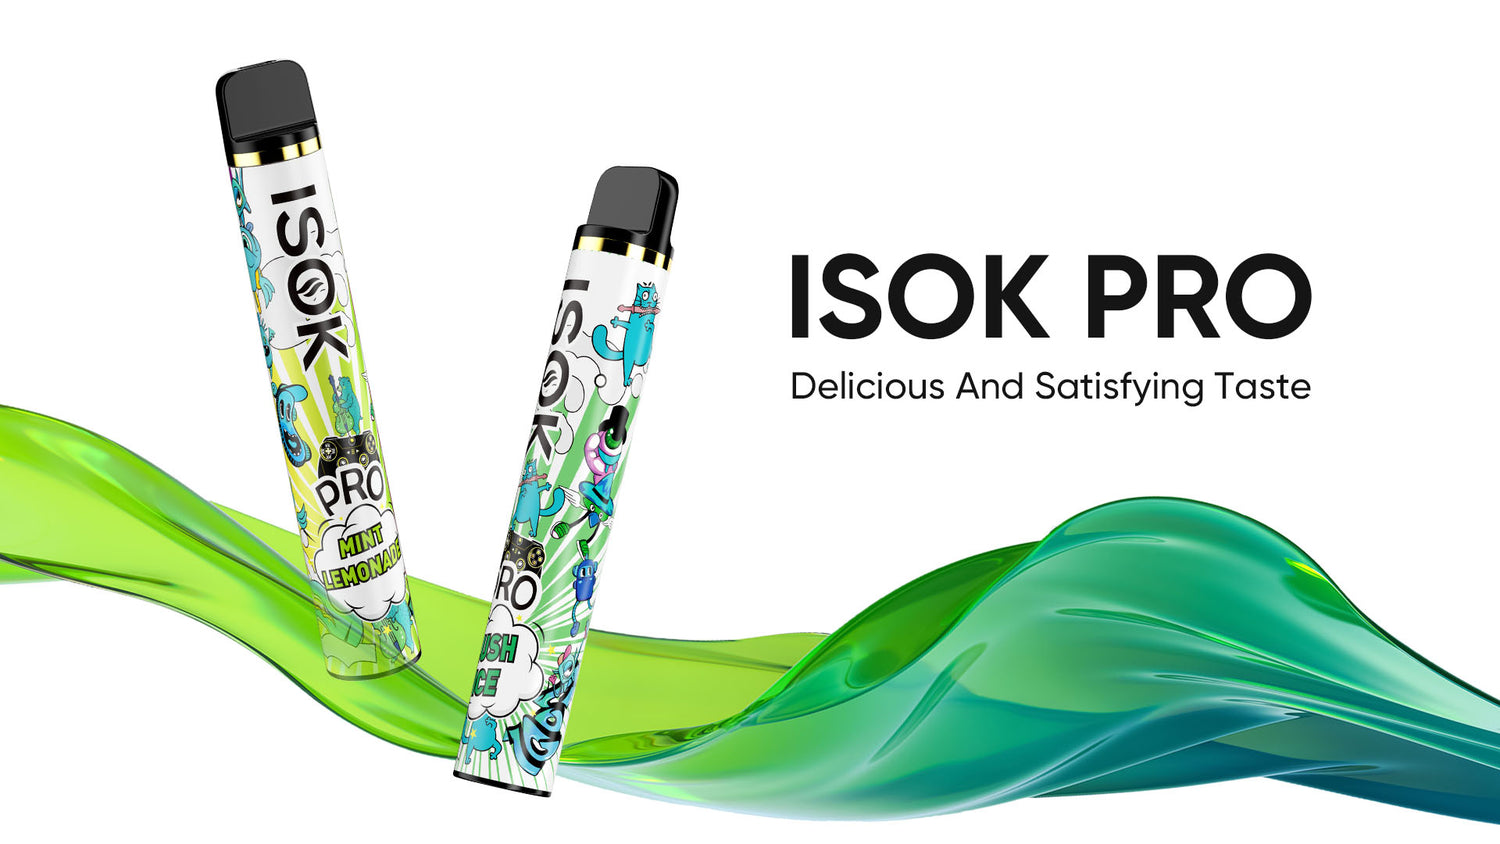 ISOK PRO Delicious and Satisfying Taste